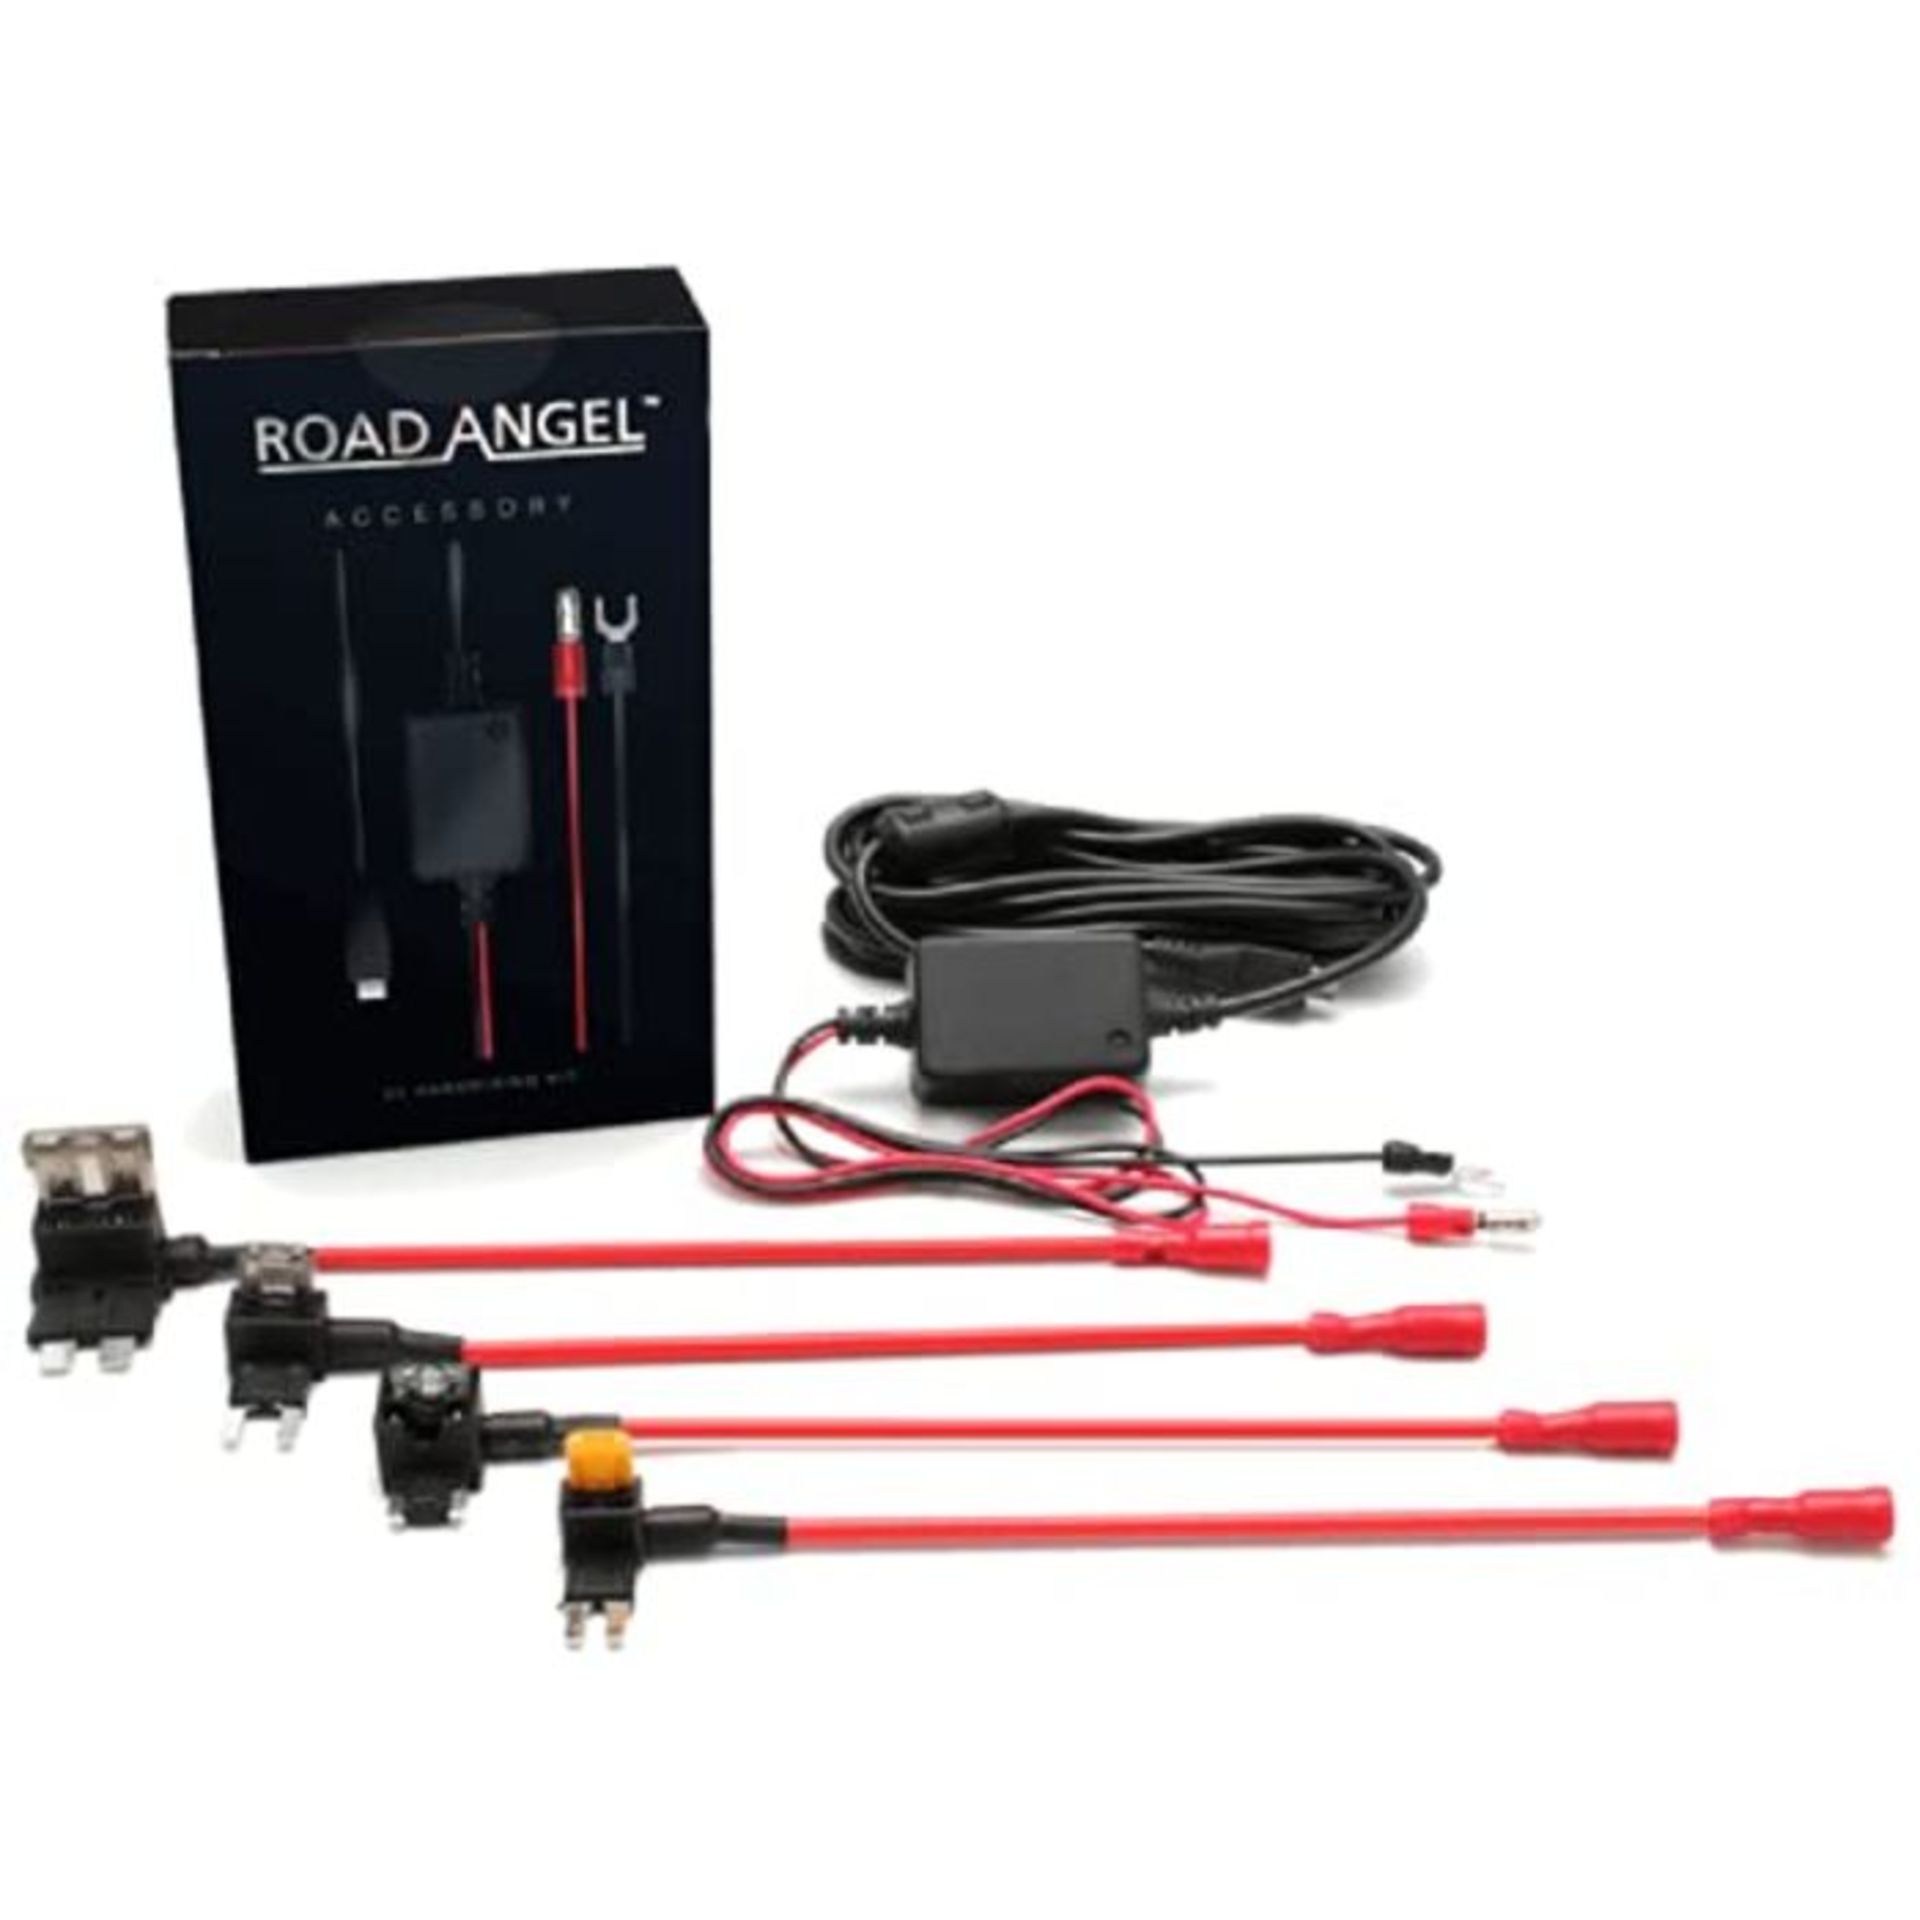 Road Angel Pure Touch Hardwire Kit for Road Angel Pure Vision, 12 V, Type C, 3M Cable